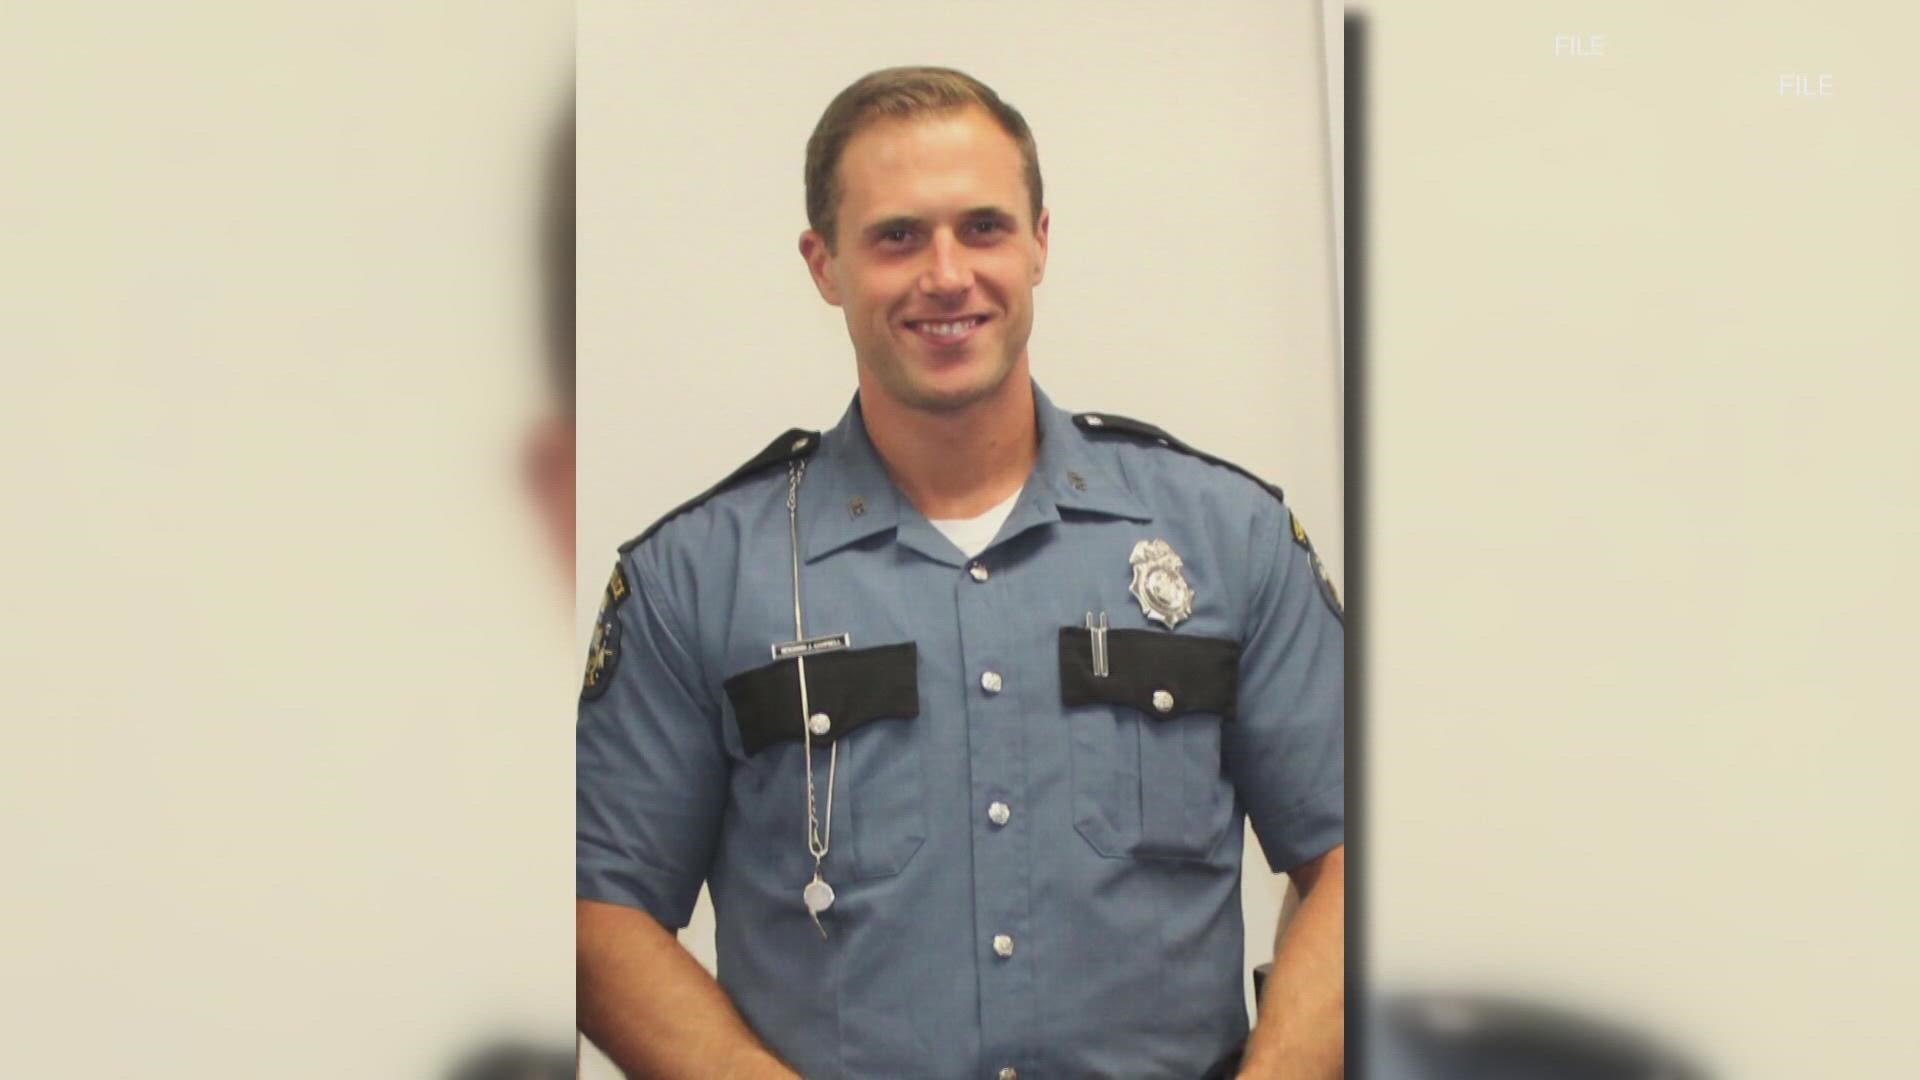 Scott Willett will take responsibility for his role in the death of Det. Benjamin Campbell, according to the Penobscot County District Attorney's office.